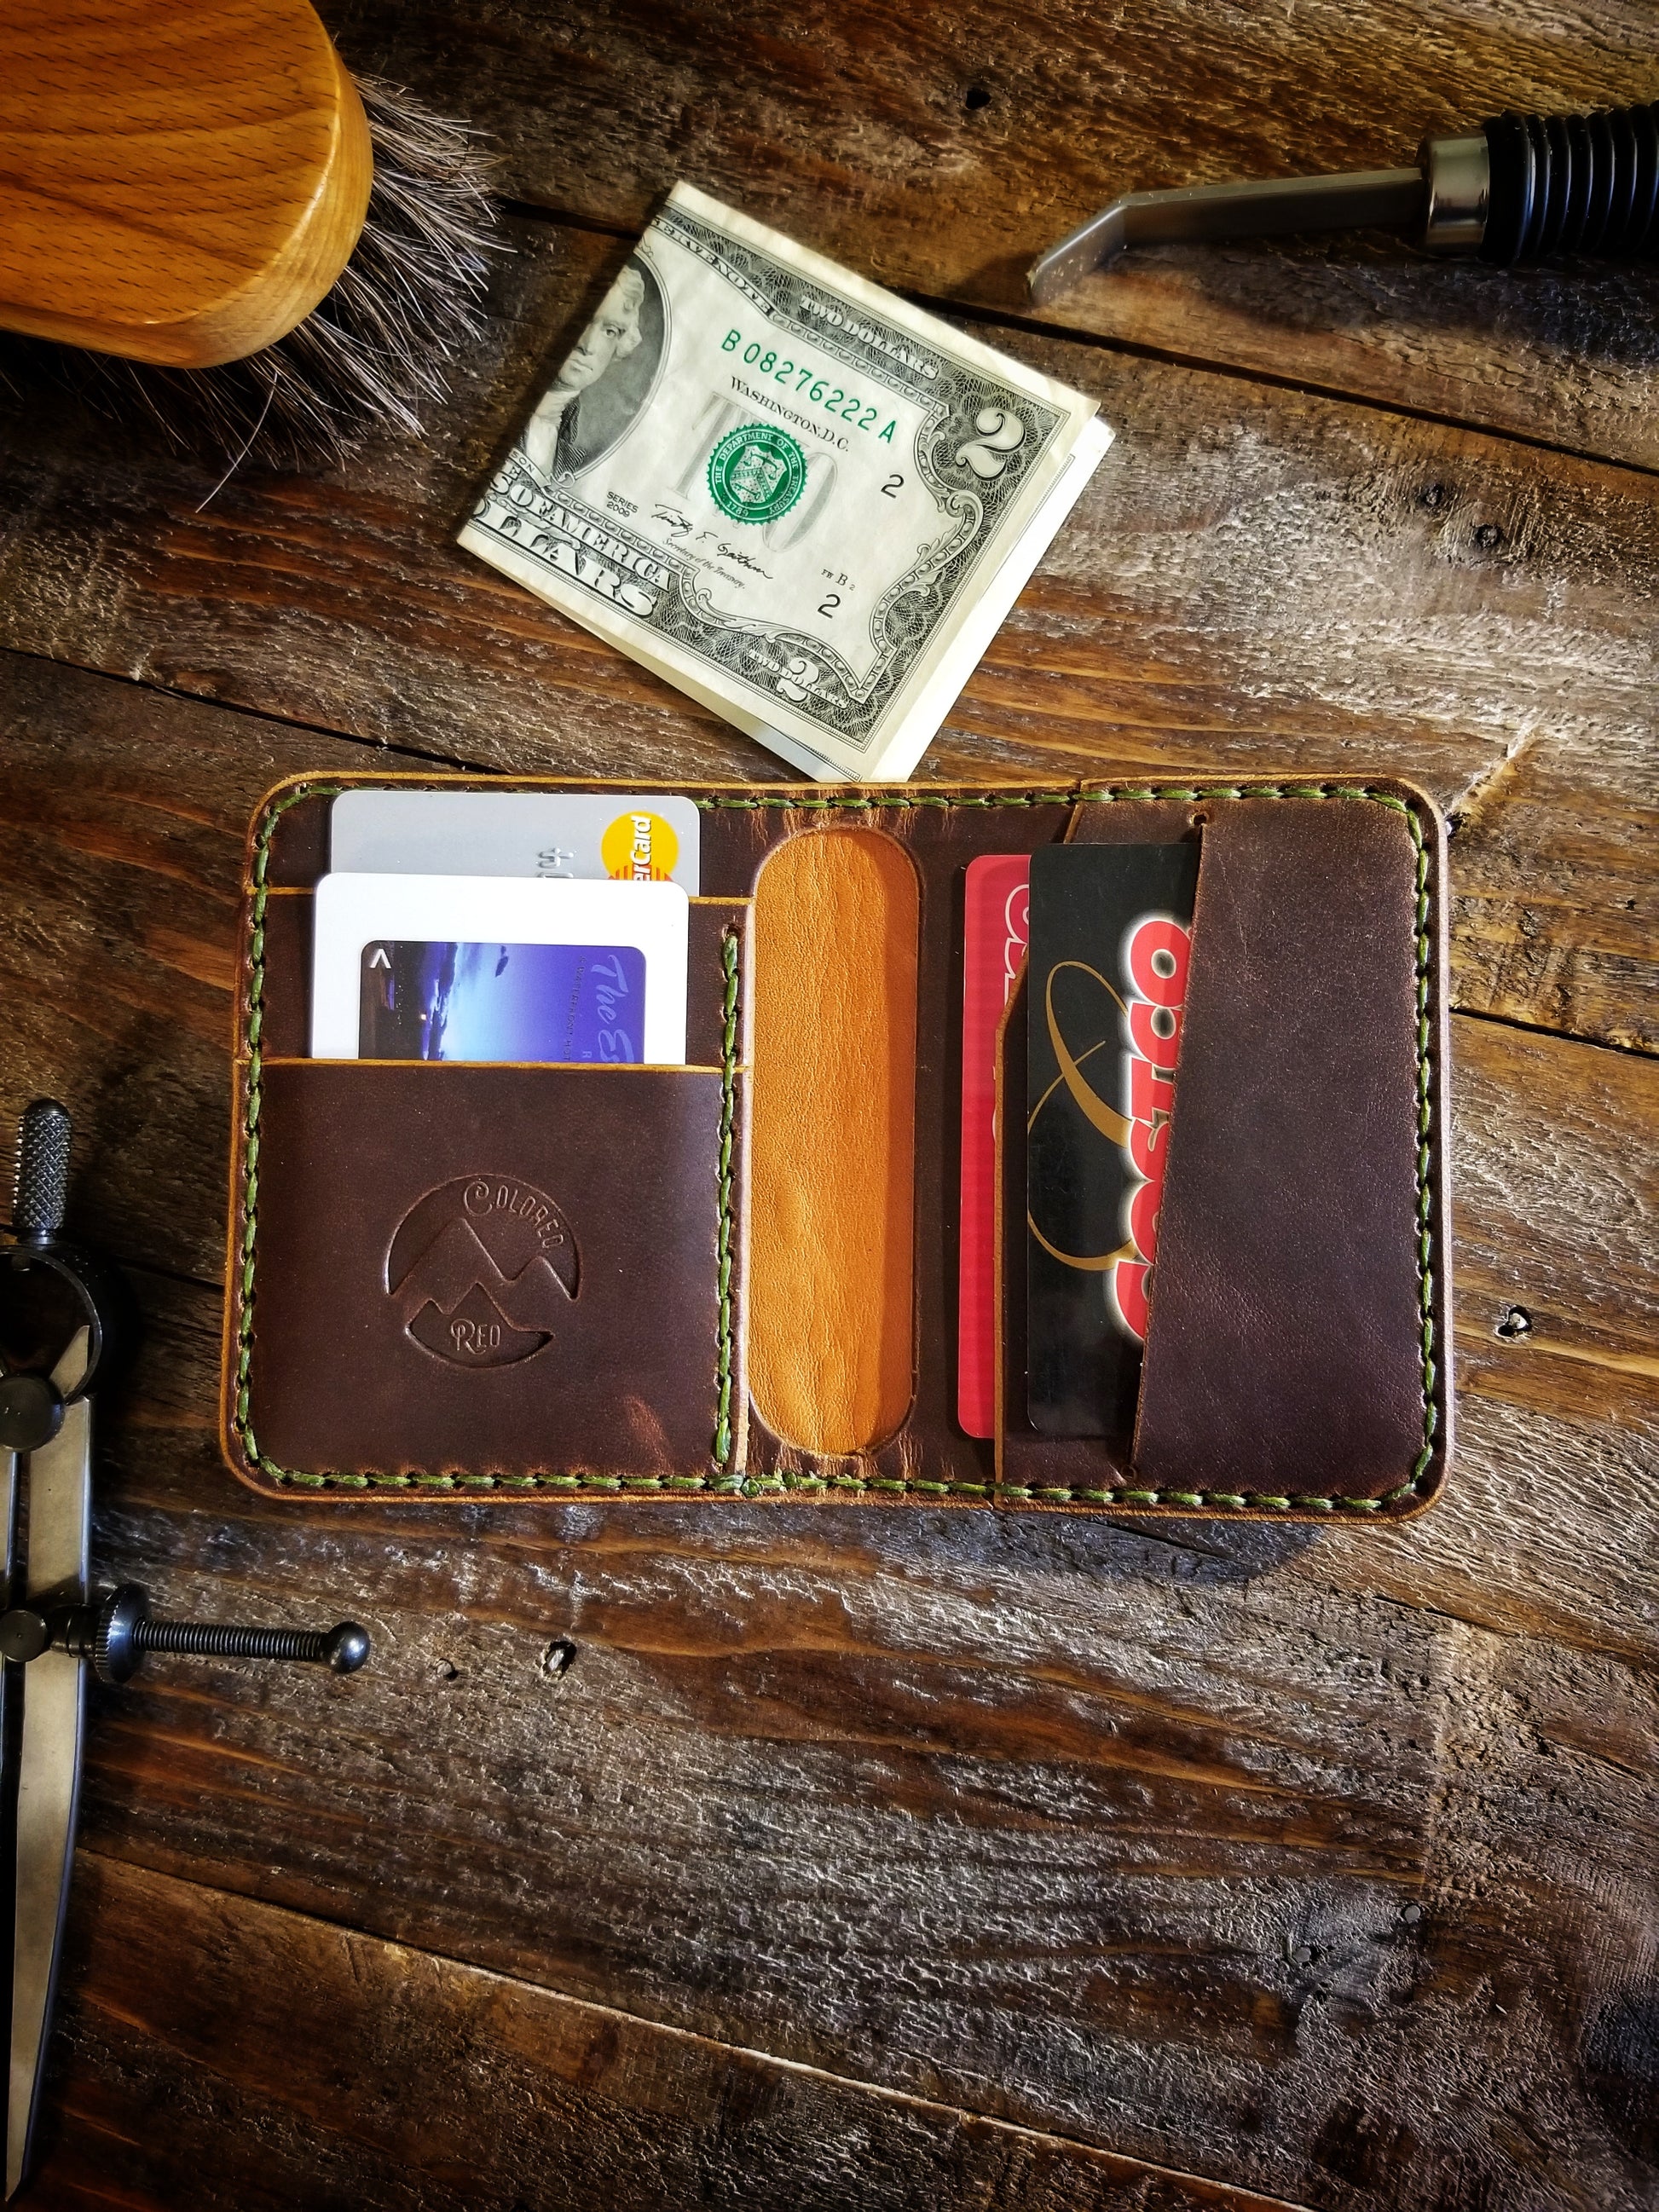 Wallet appreciation post. What kind of wallet do you carry daily? : r/EDC